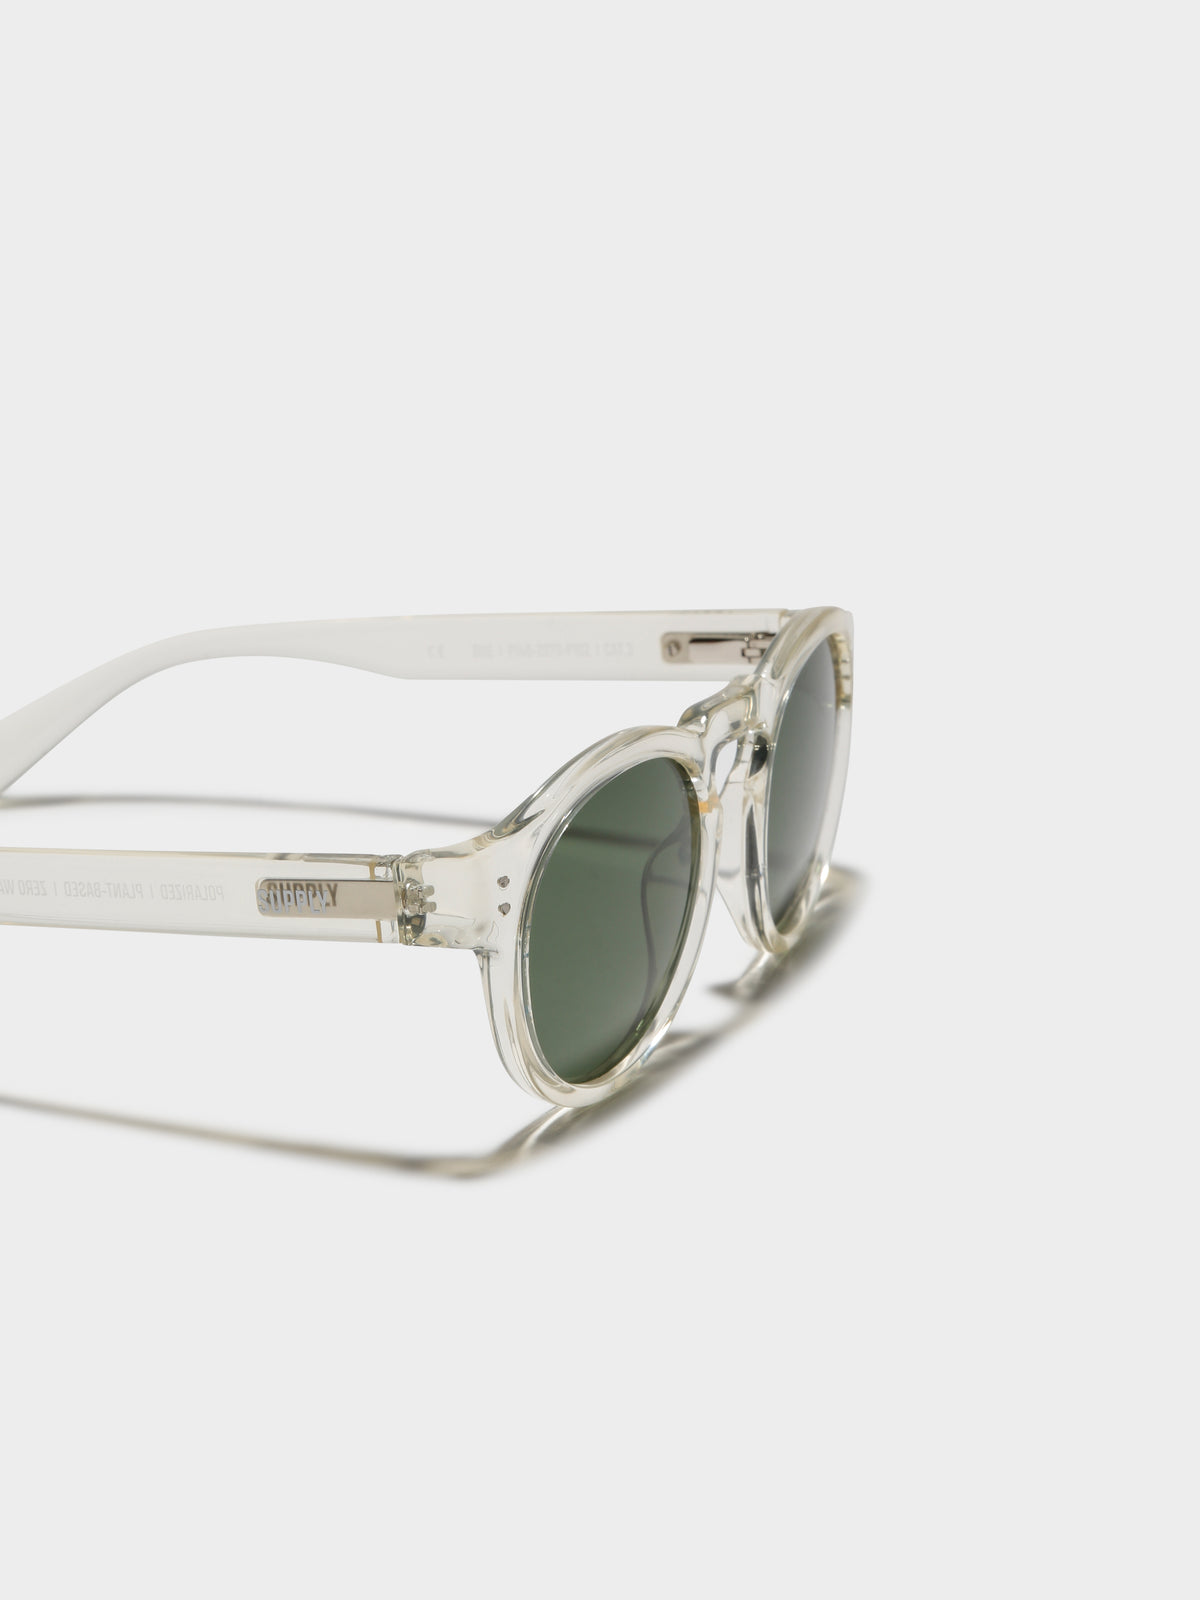 BNE Polarized Sunglasses in Polished Clear Frames